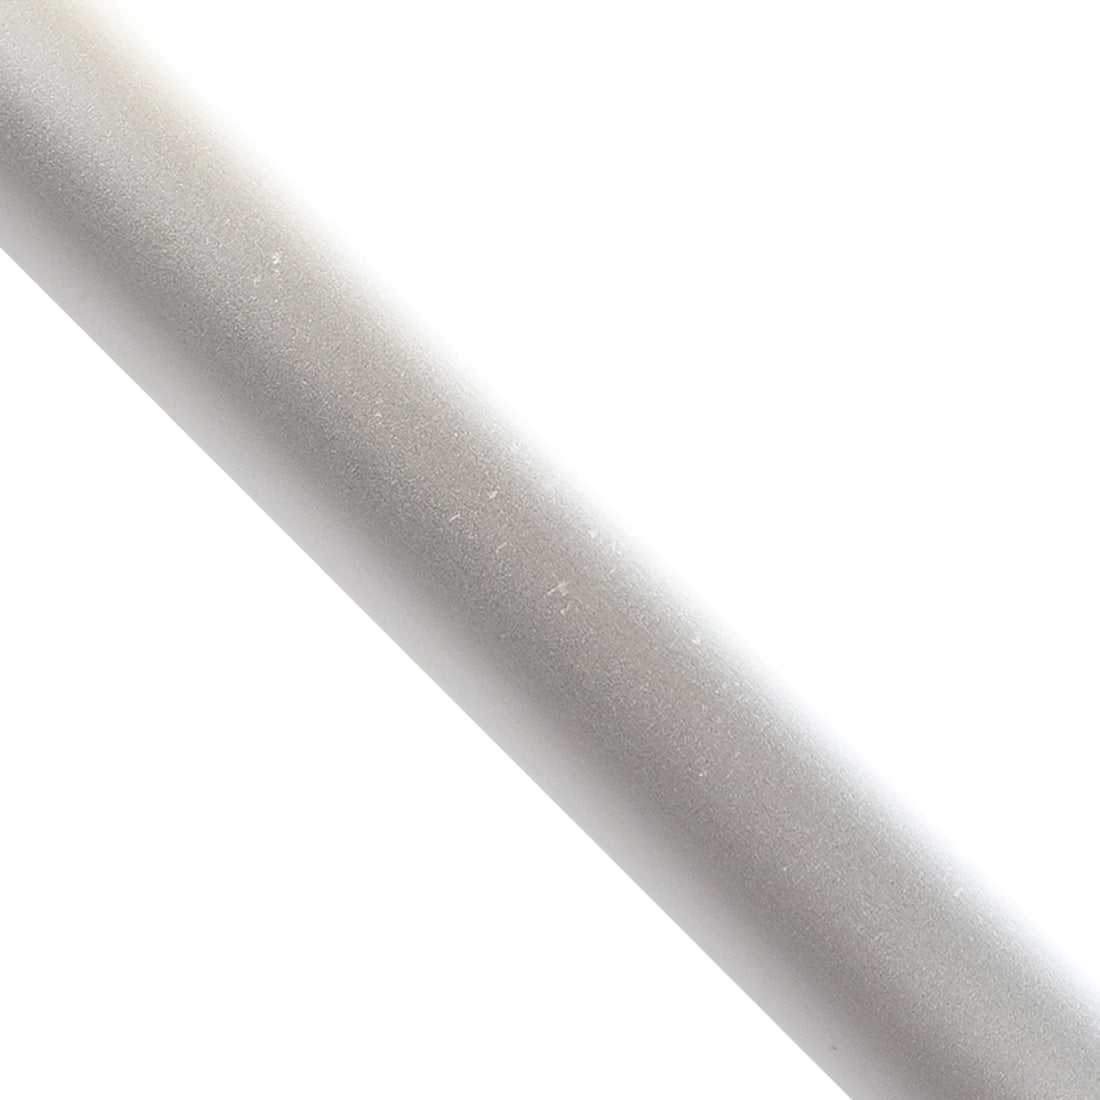 Garelick Extension Pole Close Up View